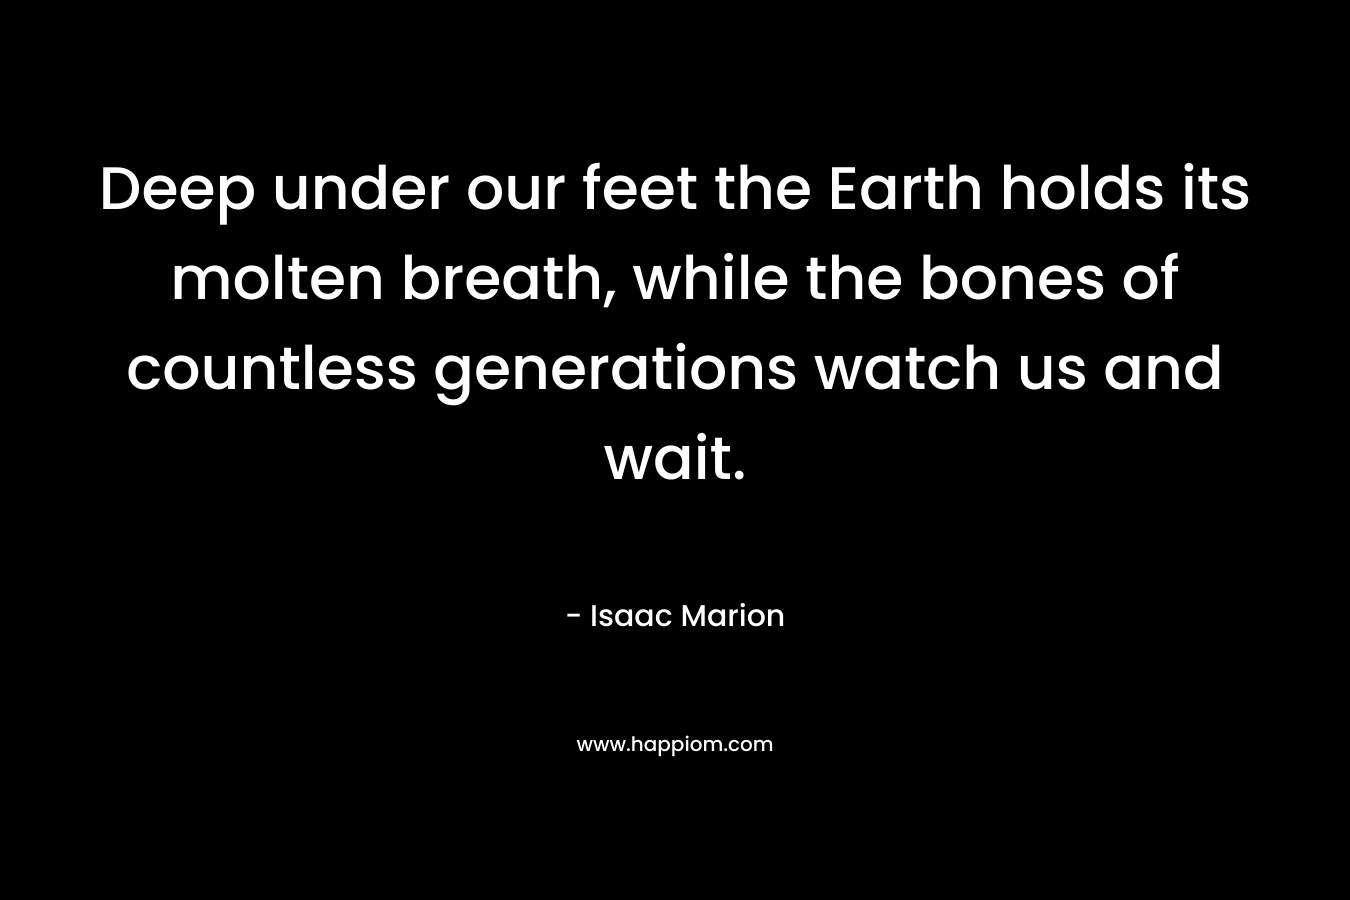 Deep under our feet the Earth holds its molten breath, while the bones of countless generations watch us and wait.